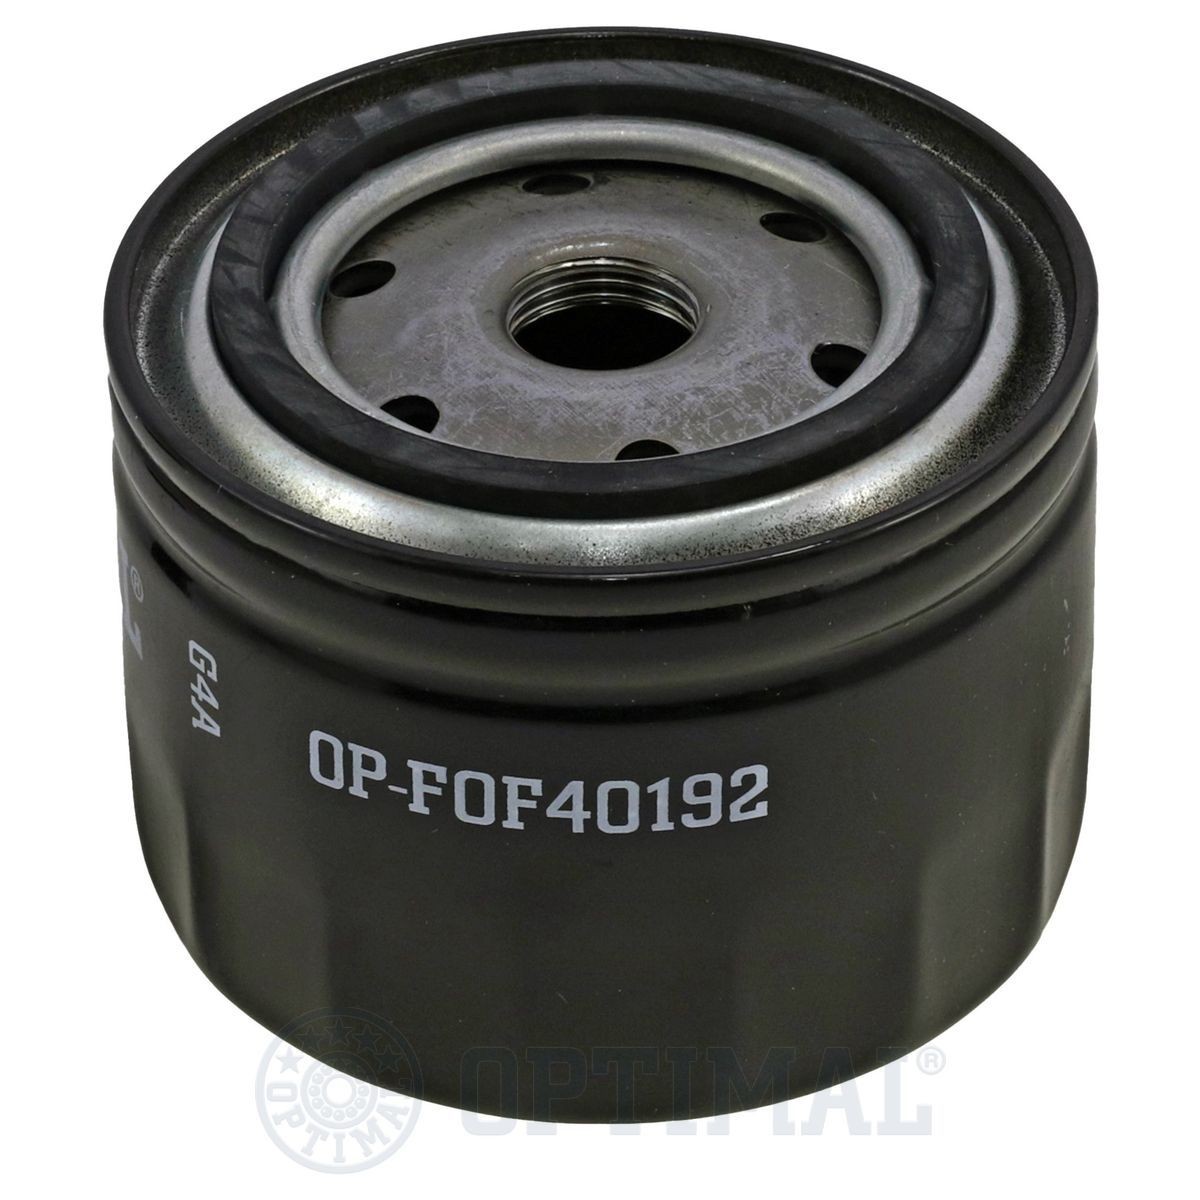 OPTIMAL OP-FOF40192 Oil filter 3/4-16 UNF, with one anti-return valve, Spin-on Filter